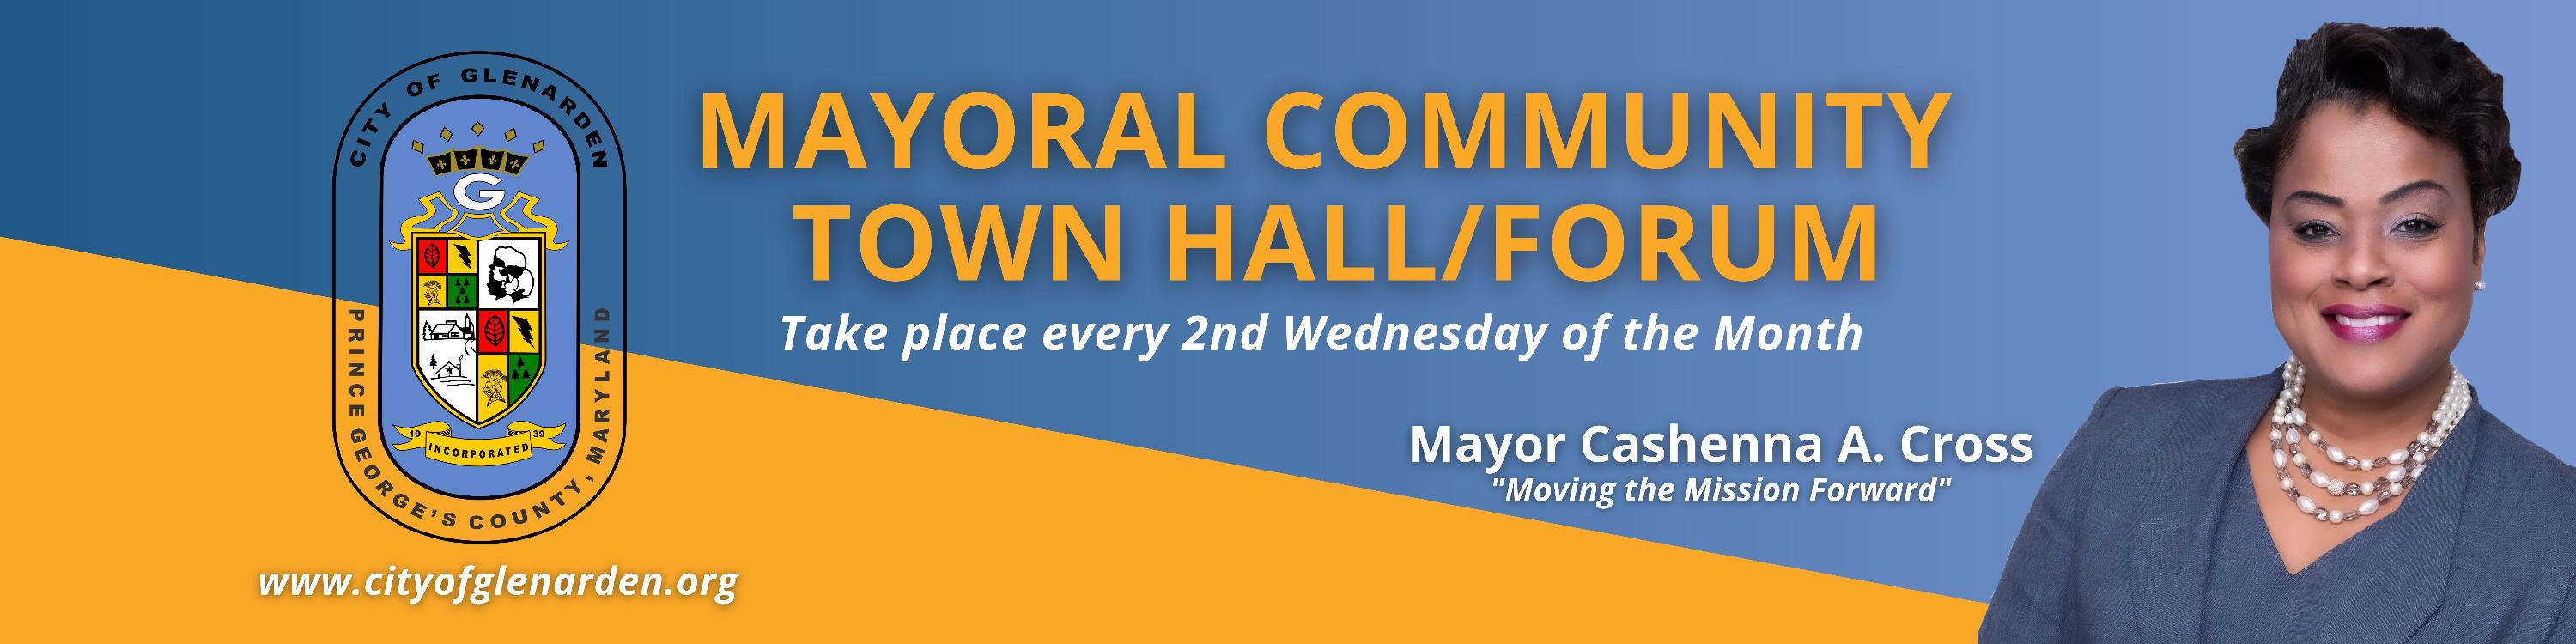 COG Monthly Mayoral Comm. TH-Forum Banner (EB)